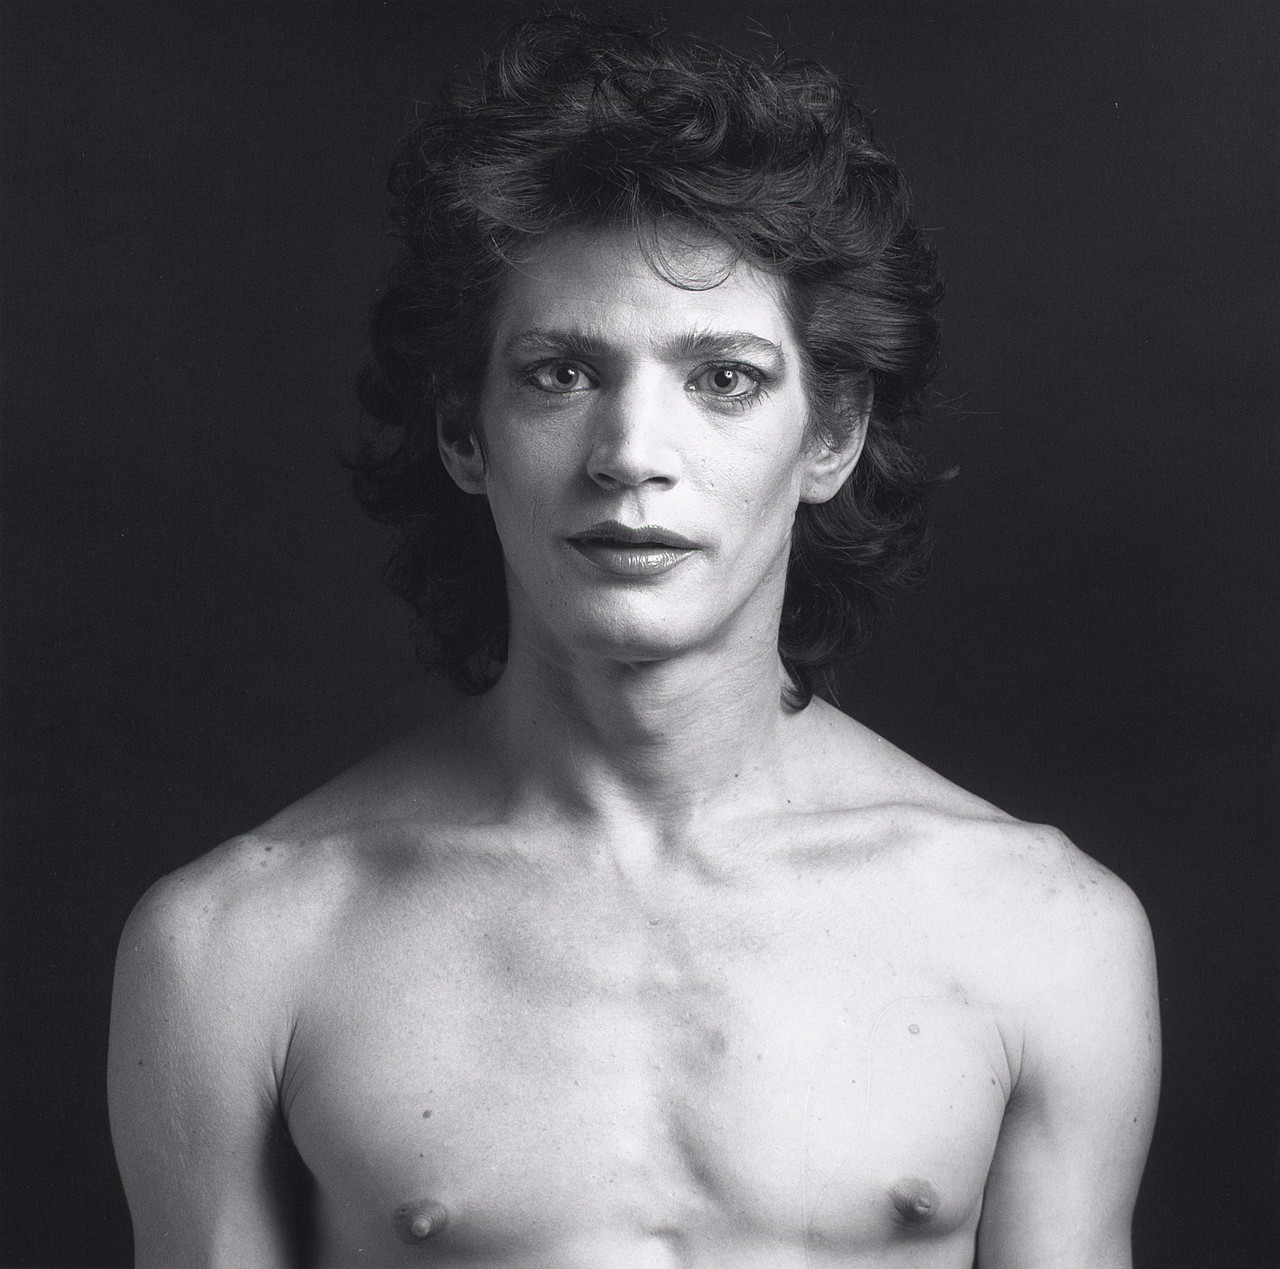 Robert Mapplethorpe Self Portrait The Guggenheim Museums and Foundation image